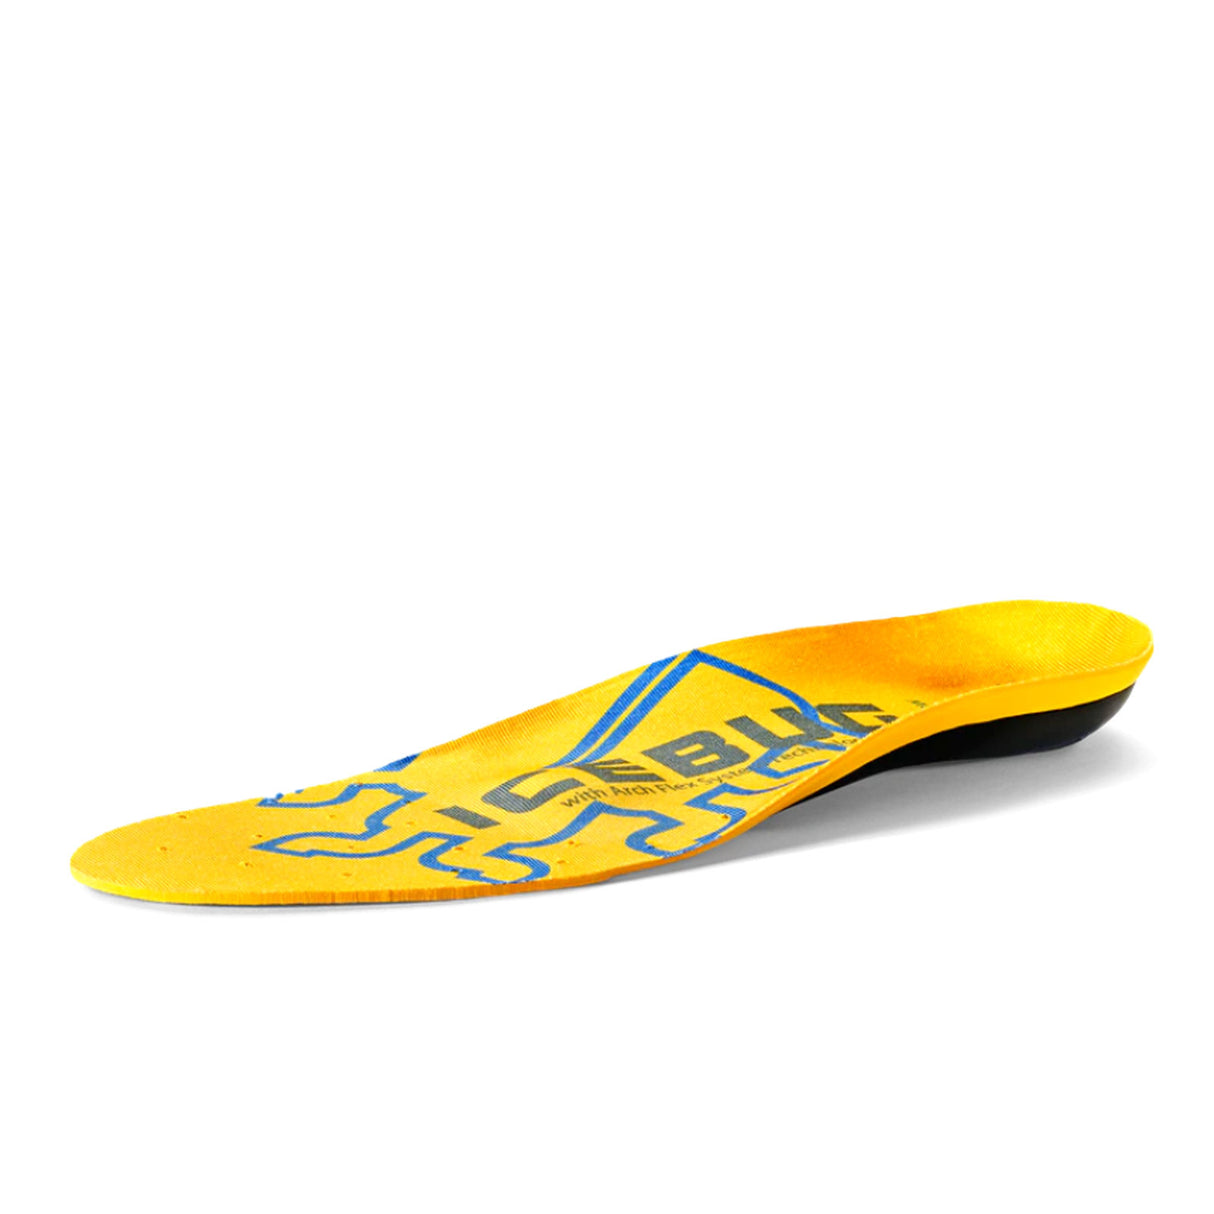 Icebug Slim Low Insole (Unisex) - Yellow Accessories - Orthotics/Insoles - Full Length - The Heel Shoe Fitters